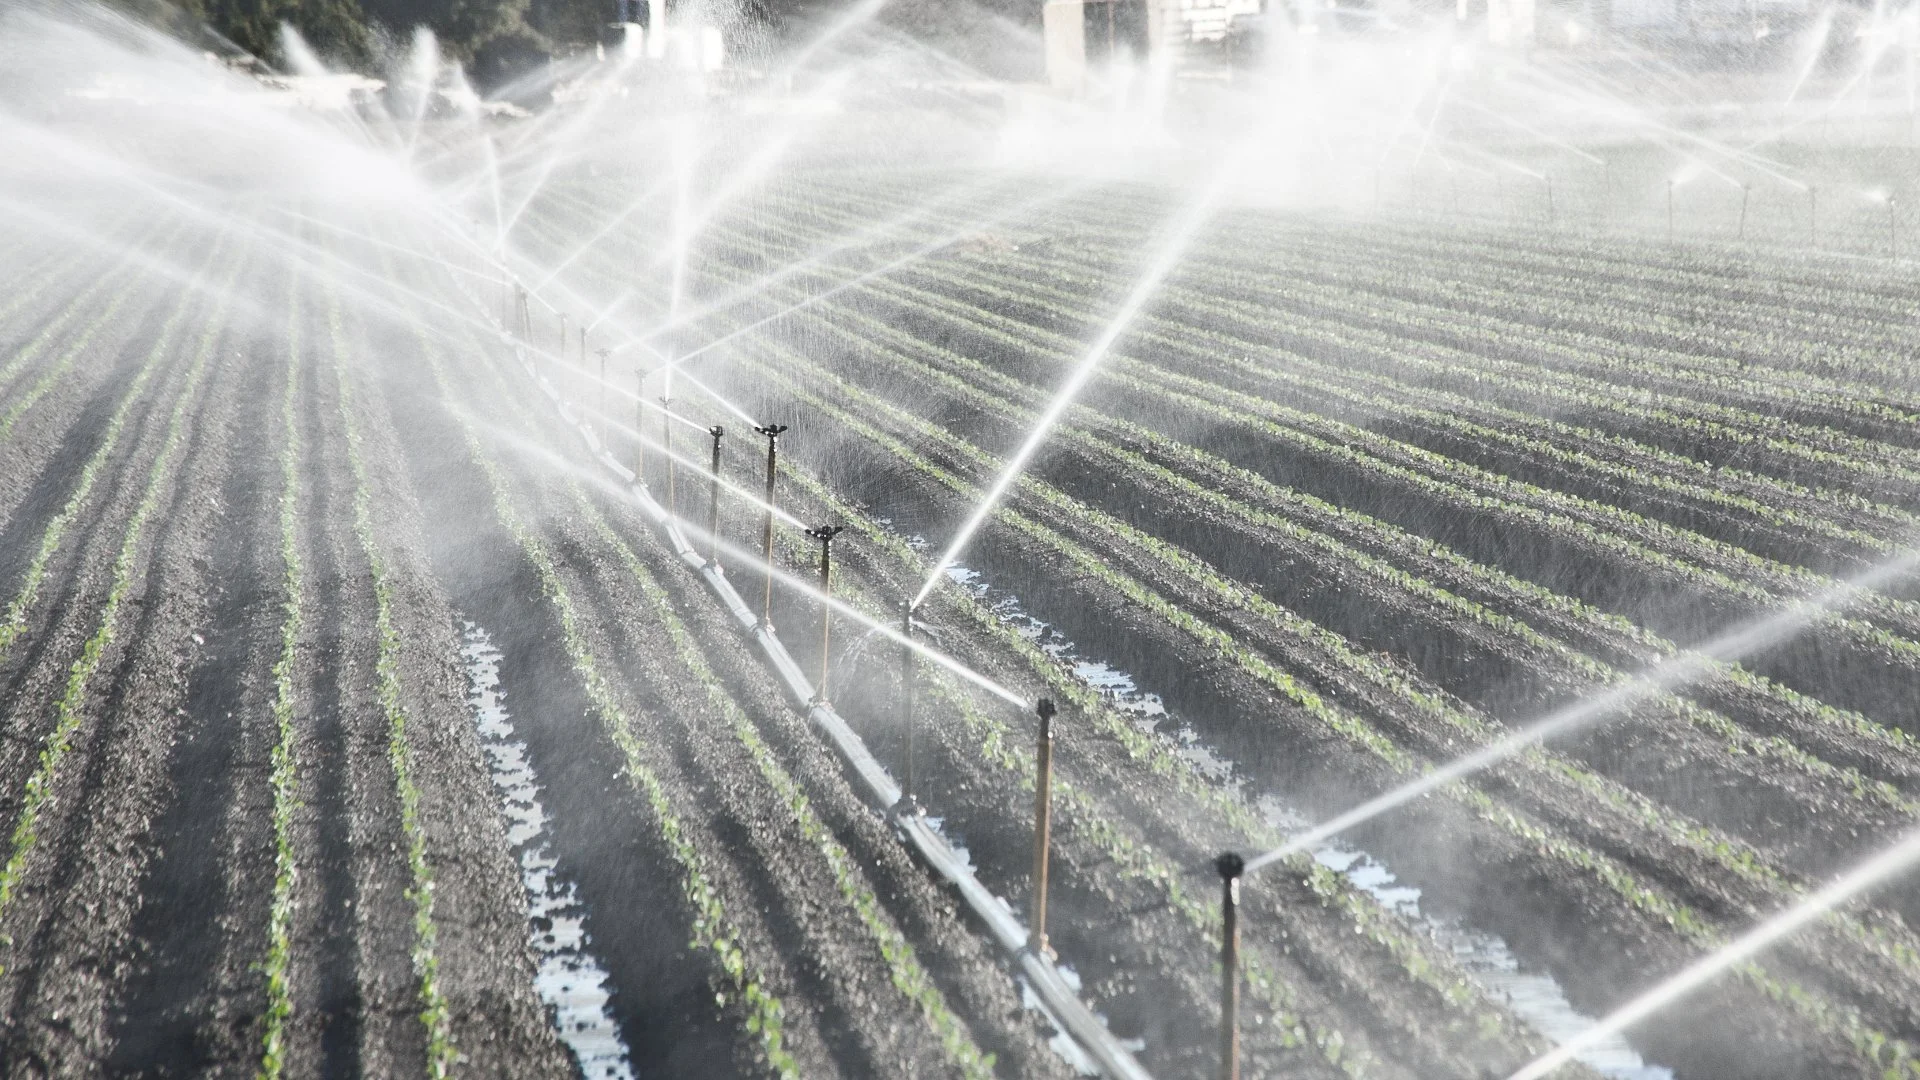 4 Irrigation Systems to Consider Using for Your Marijuana Crops